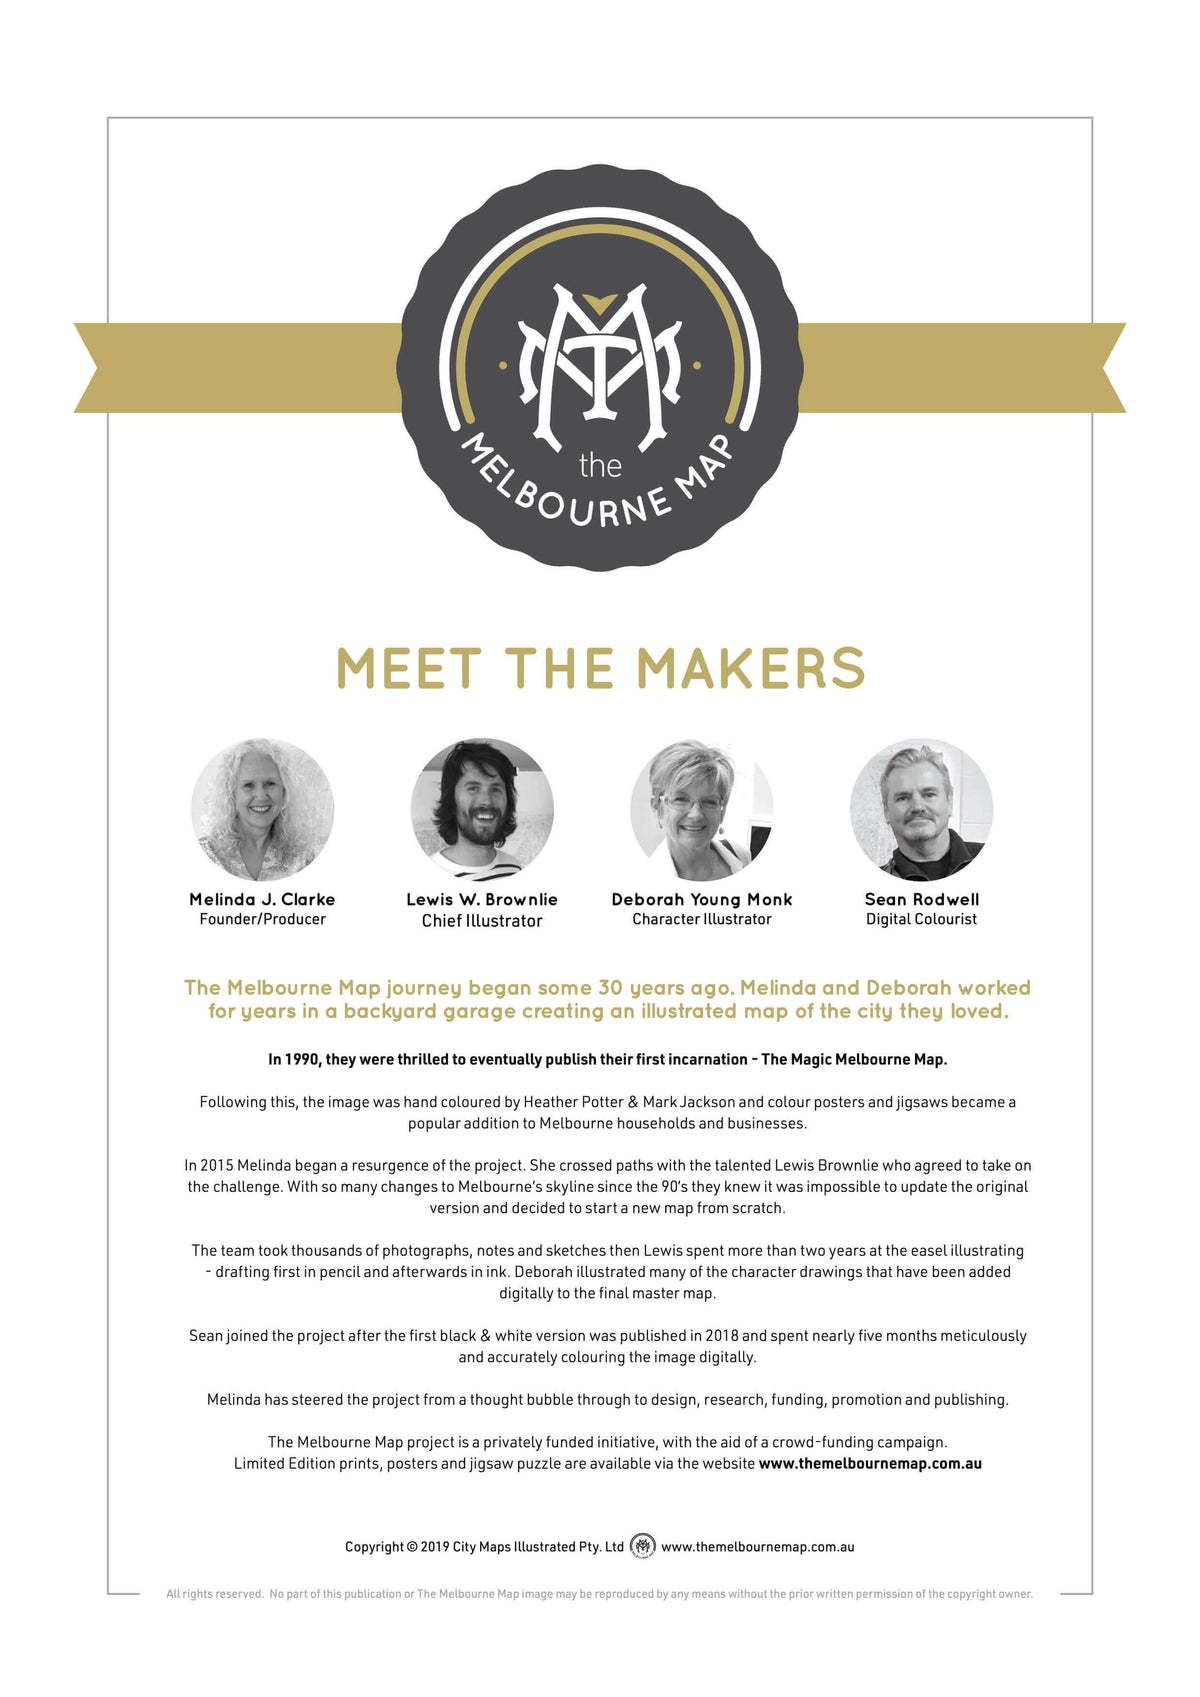 The Melbourne Map&#39;s Meet the Makers document featuring headshots of Melinda Clarke and the artists Lewis Brownlie, Deborah Young-Monk, and Sean Rodwell. The document also gives a brief overview of the project&#39;s history.